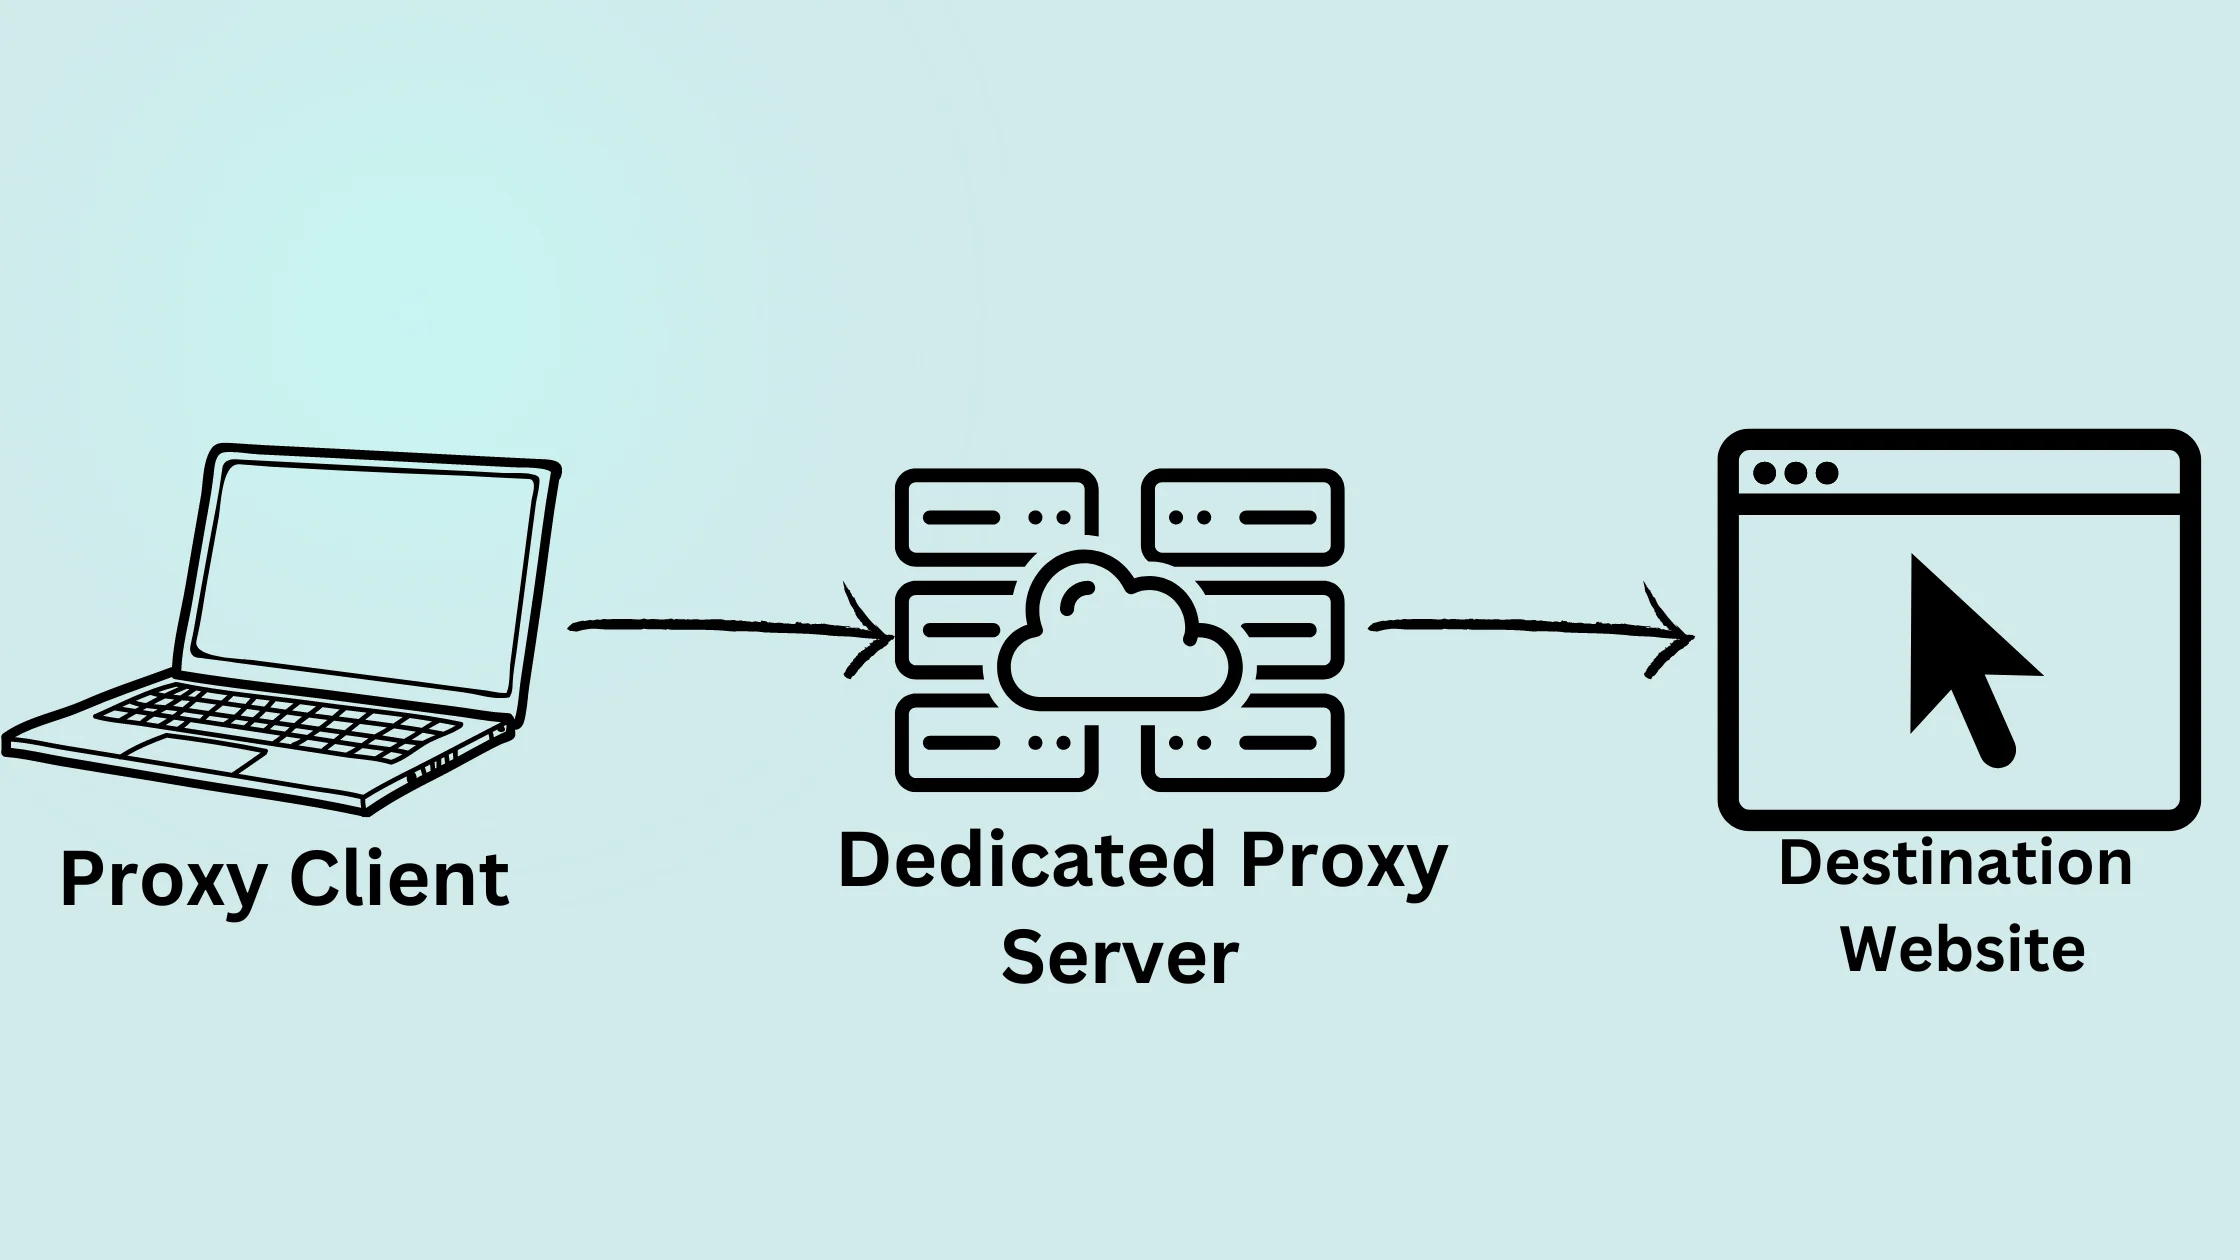 What is a Dedicated Proxy?